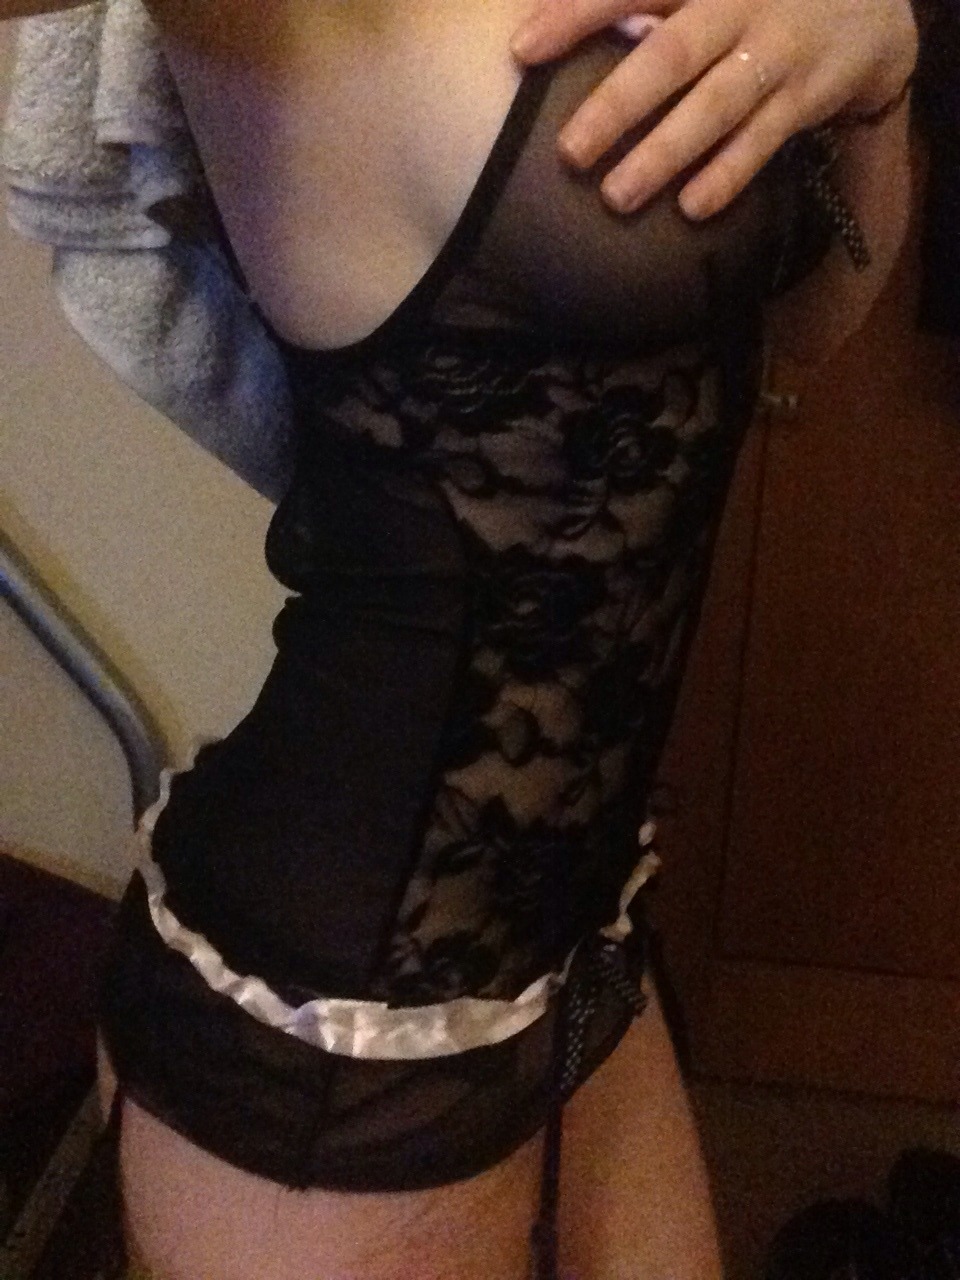 got this from my wishlist!!! thank you!! it&rsquo;s super cute and sexy, i love itmore on my wishlist here, and yes i will take photos ;) http://www.amazon.co.uk/registry/wishlist/11YQMNC5VSXQ0